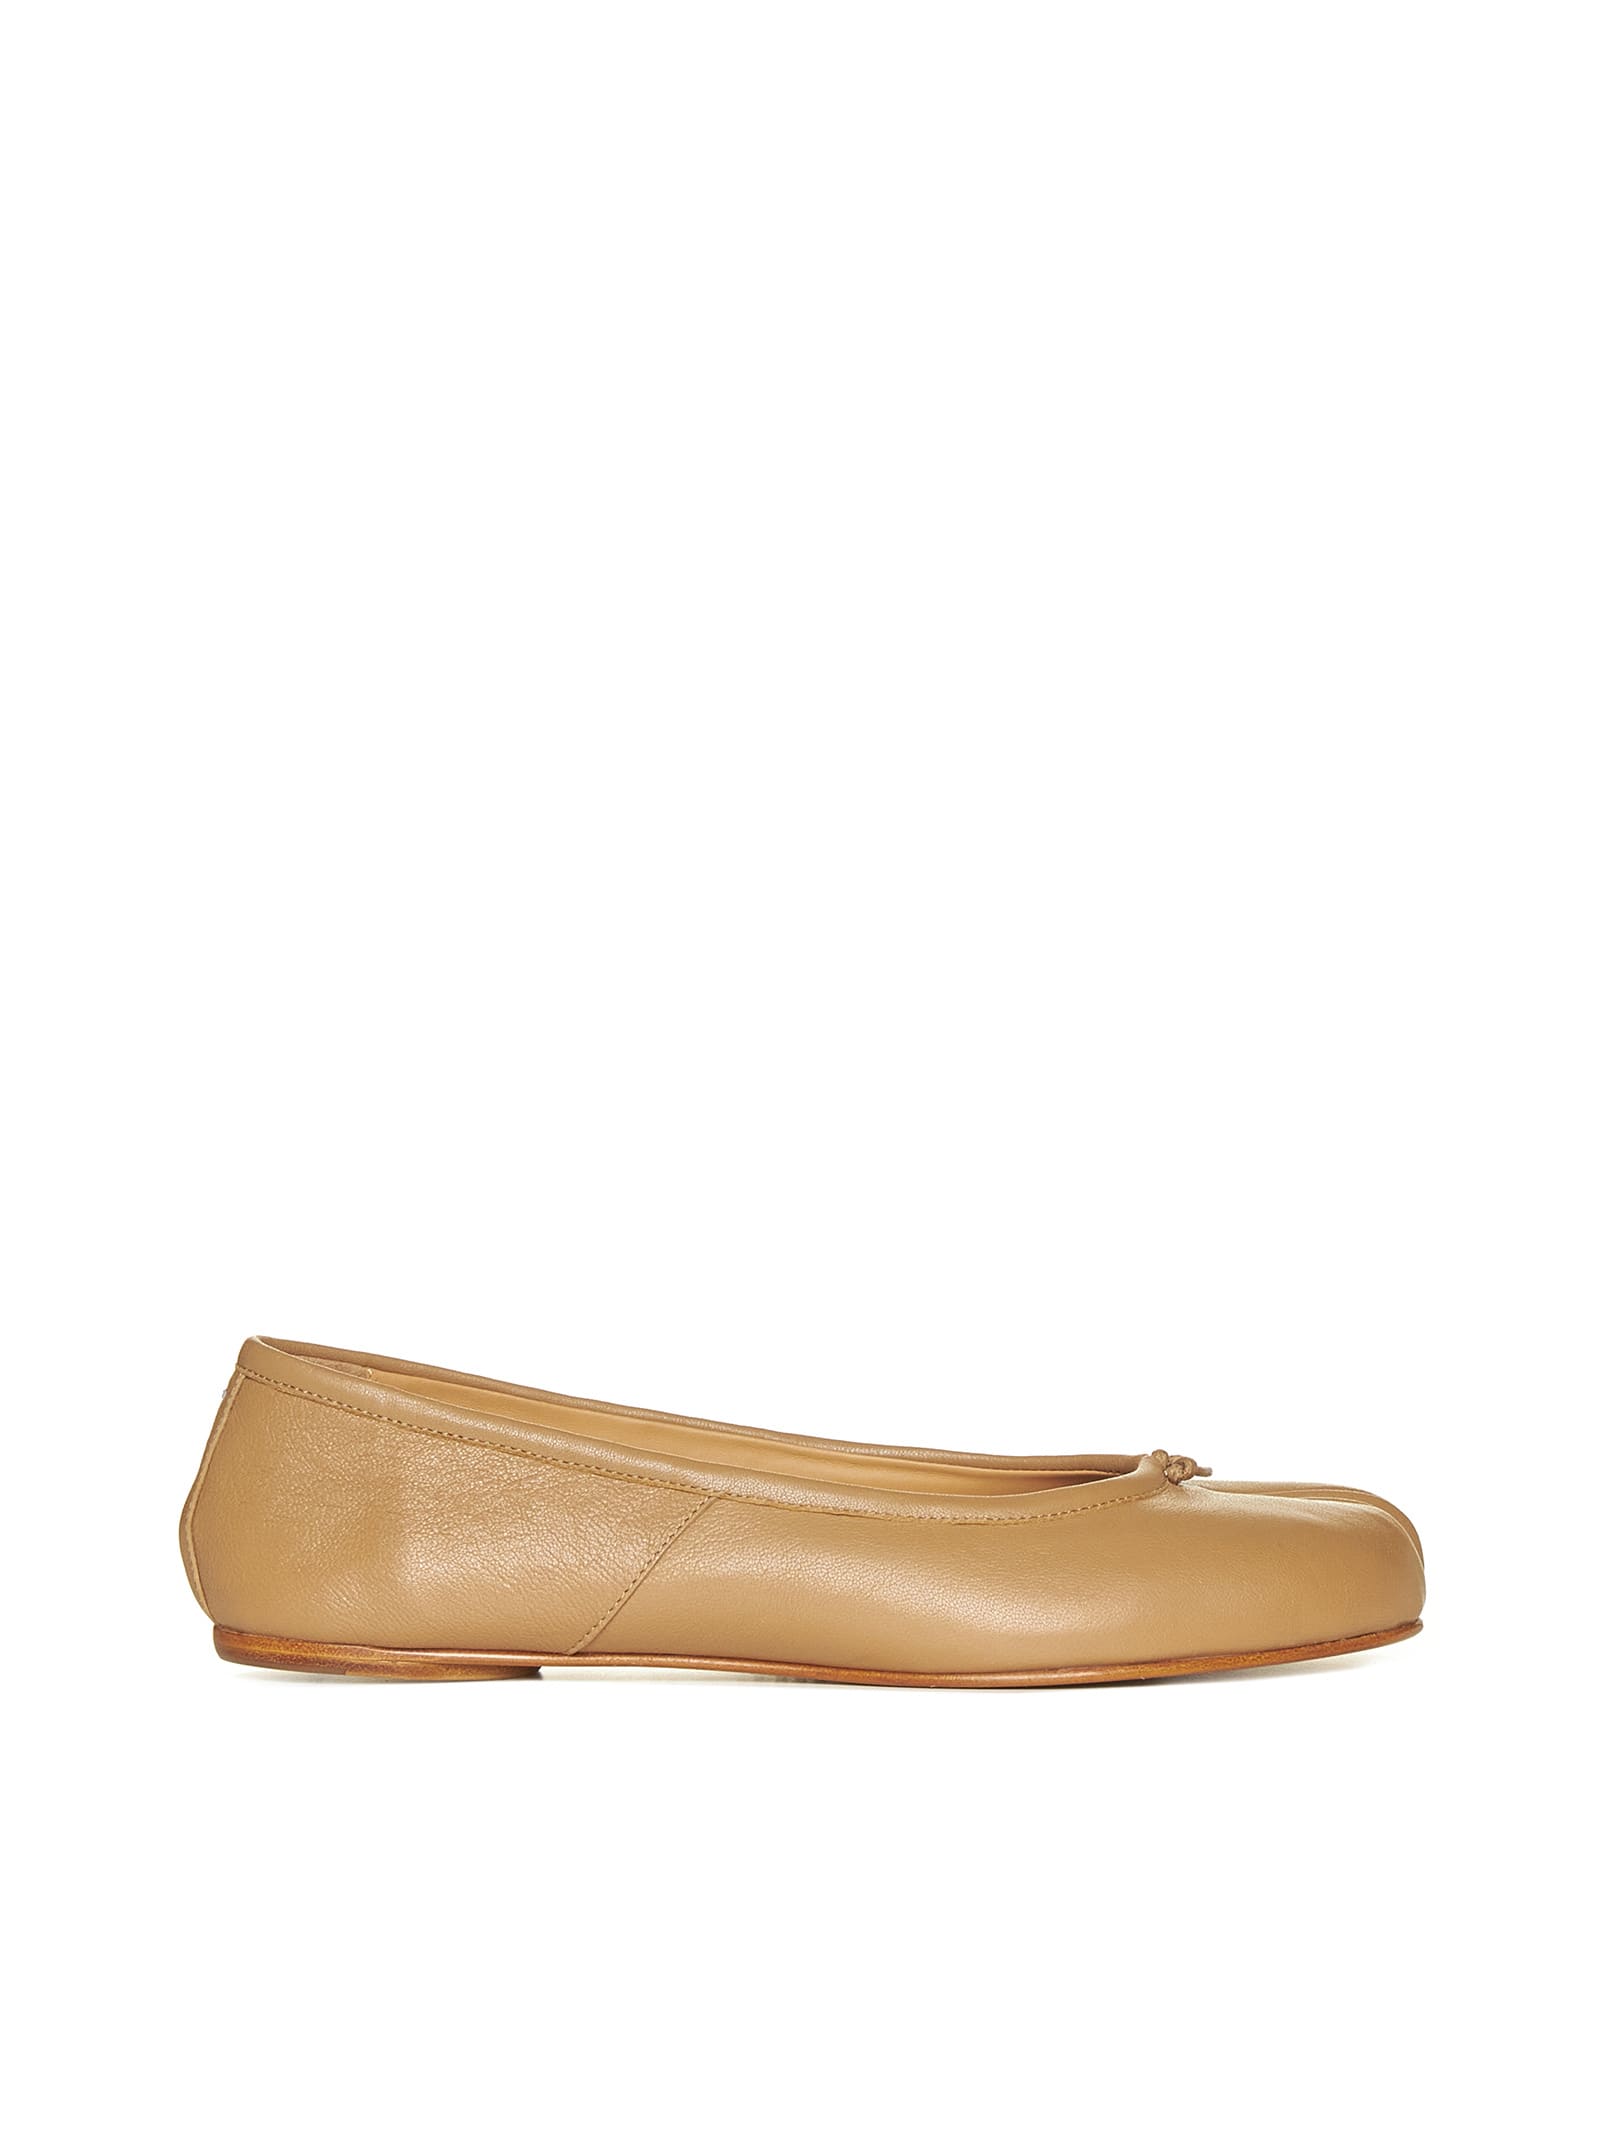 Maison Margiela Flat Shoes In Brown